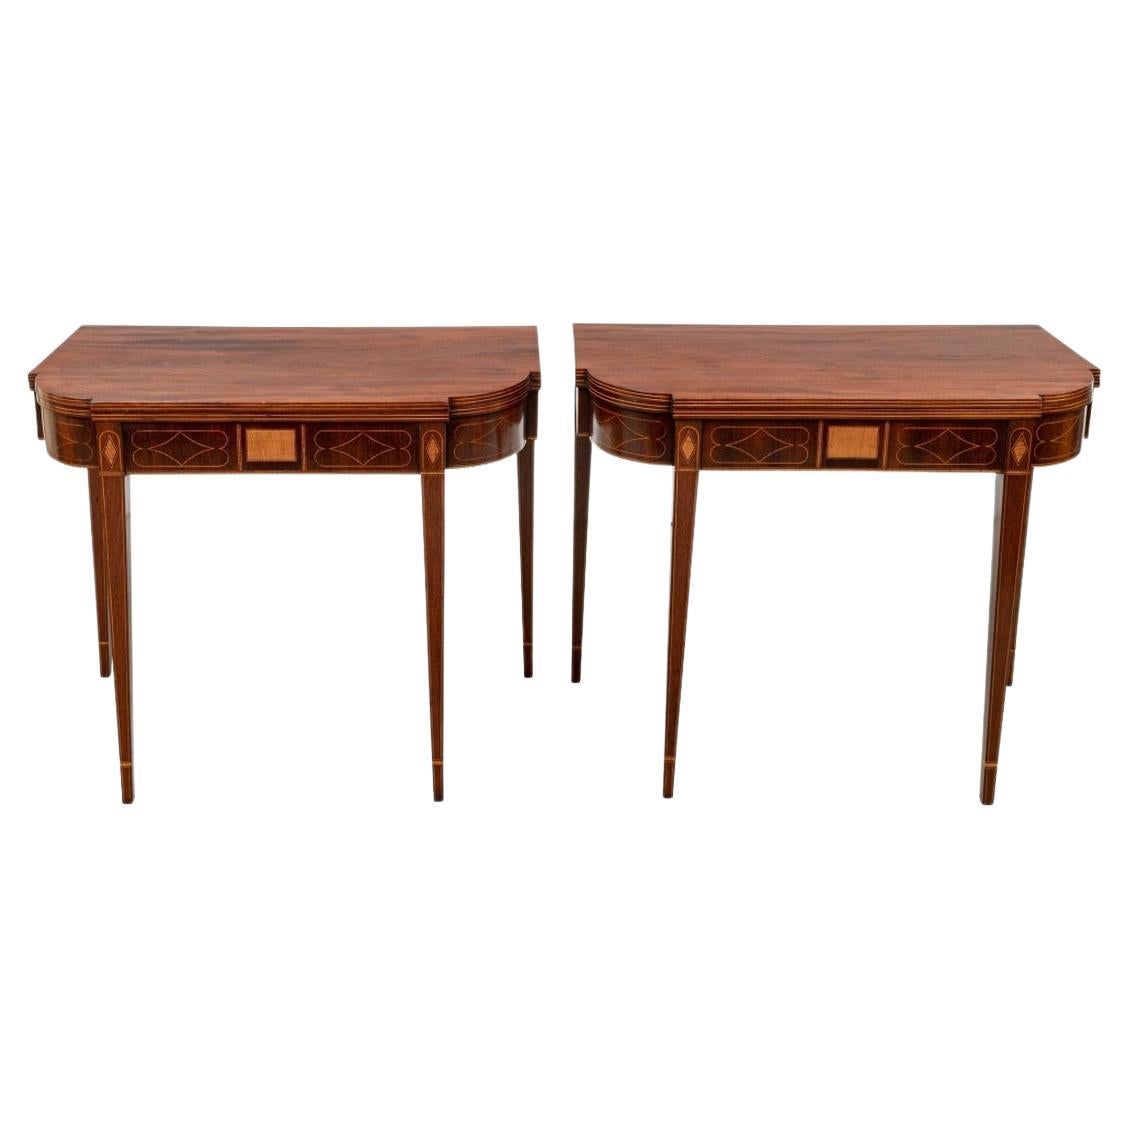 Extraordinary Pair of Fine Period Federal Inlaid Mahogany Console Tables